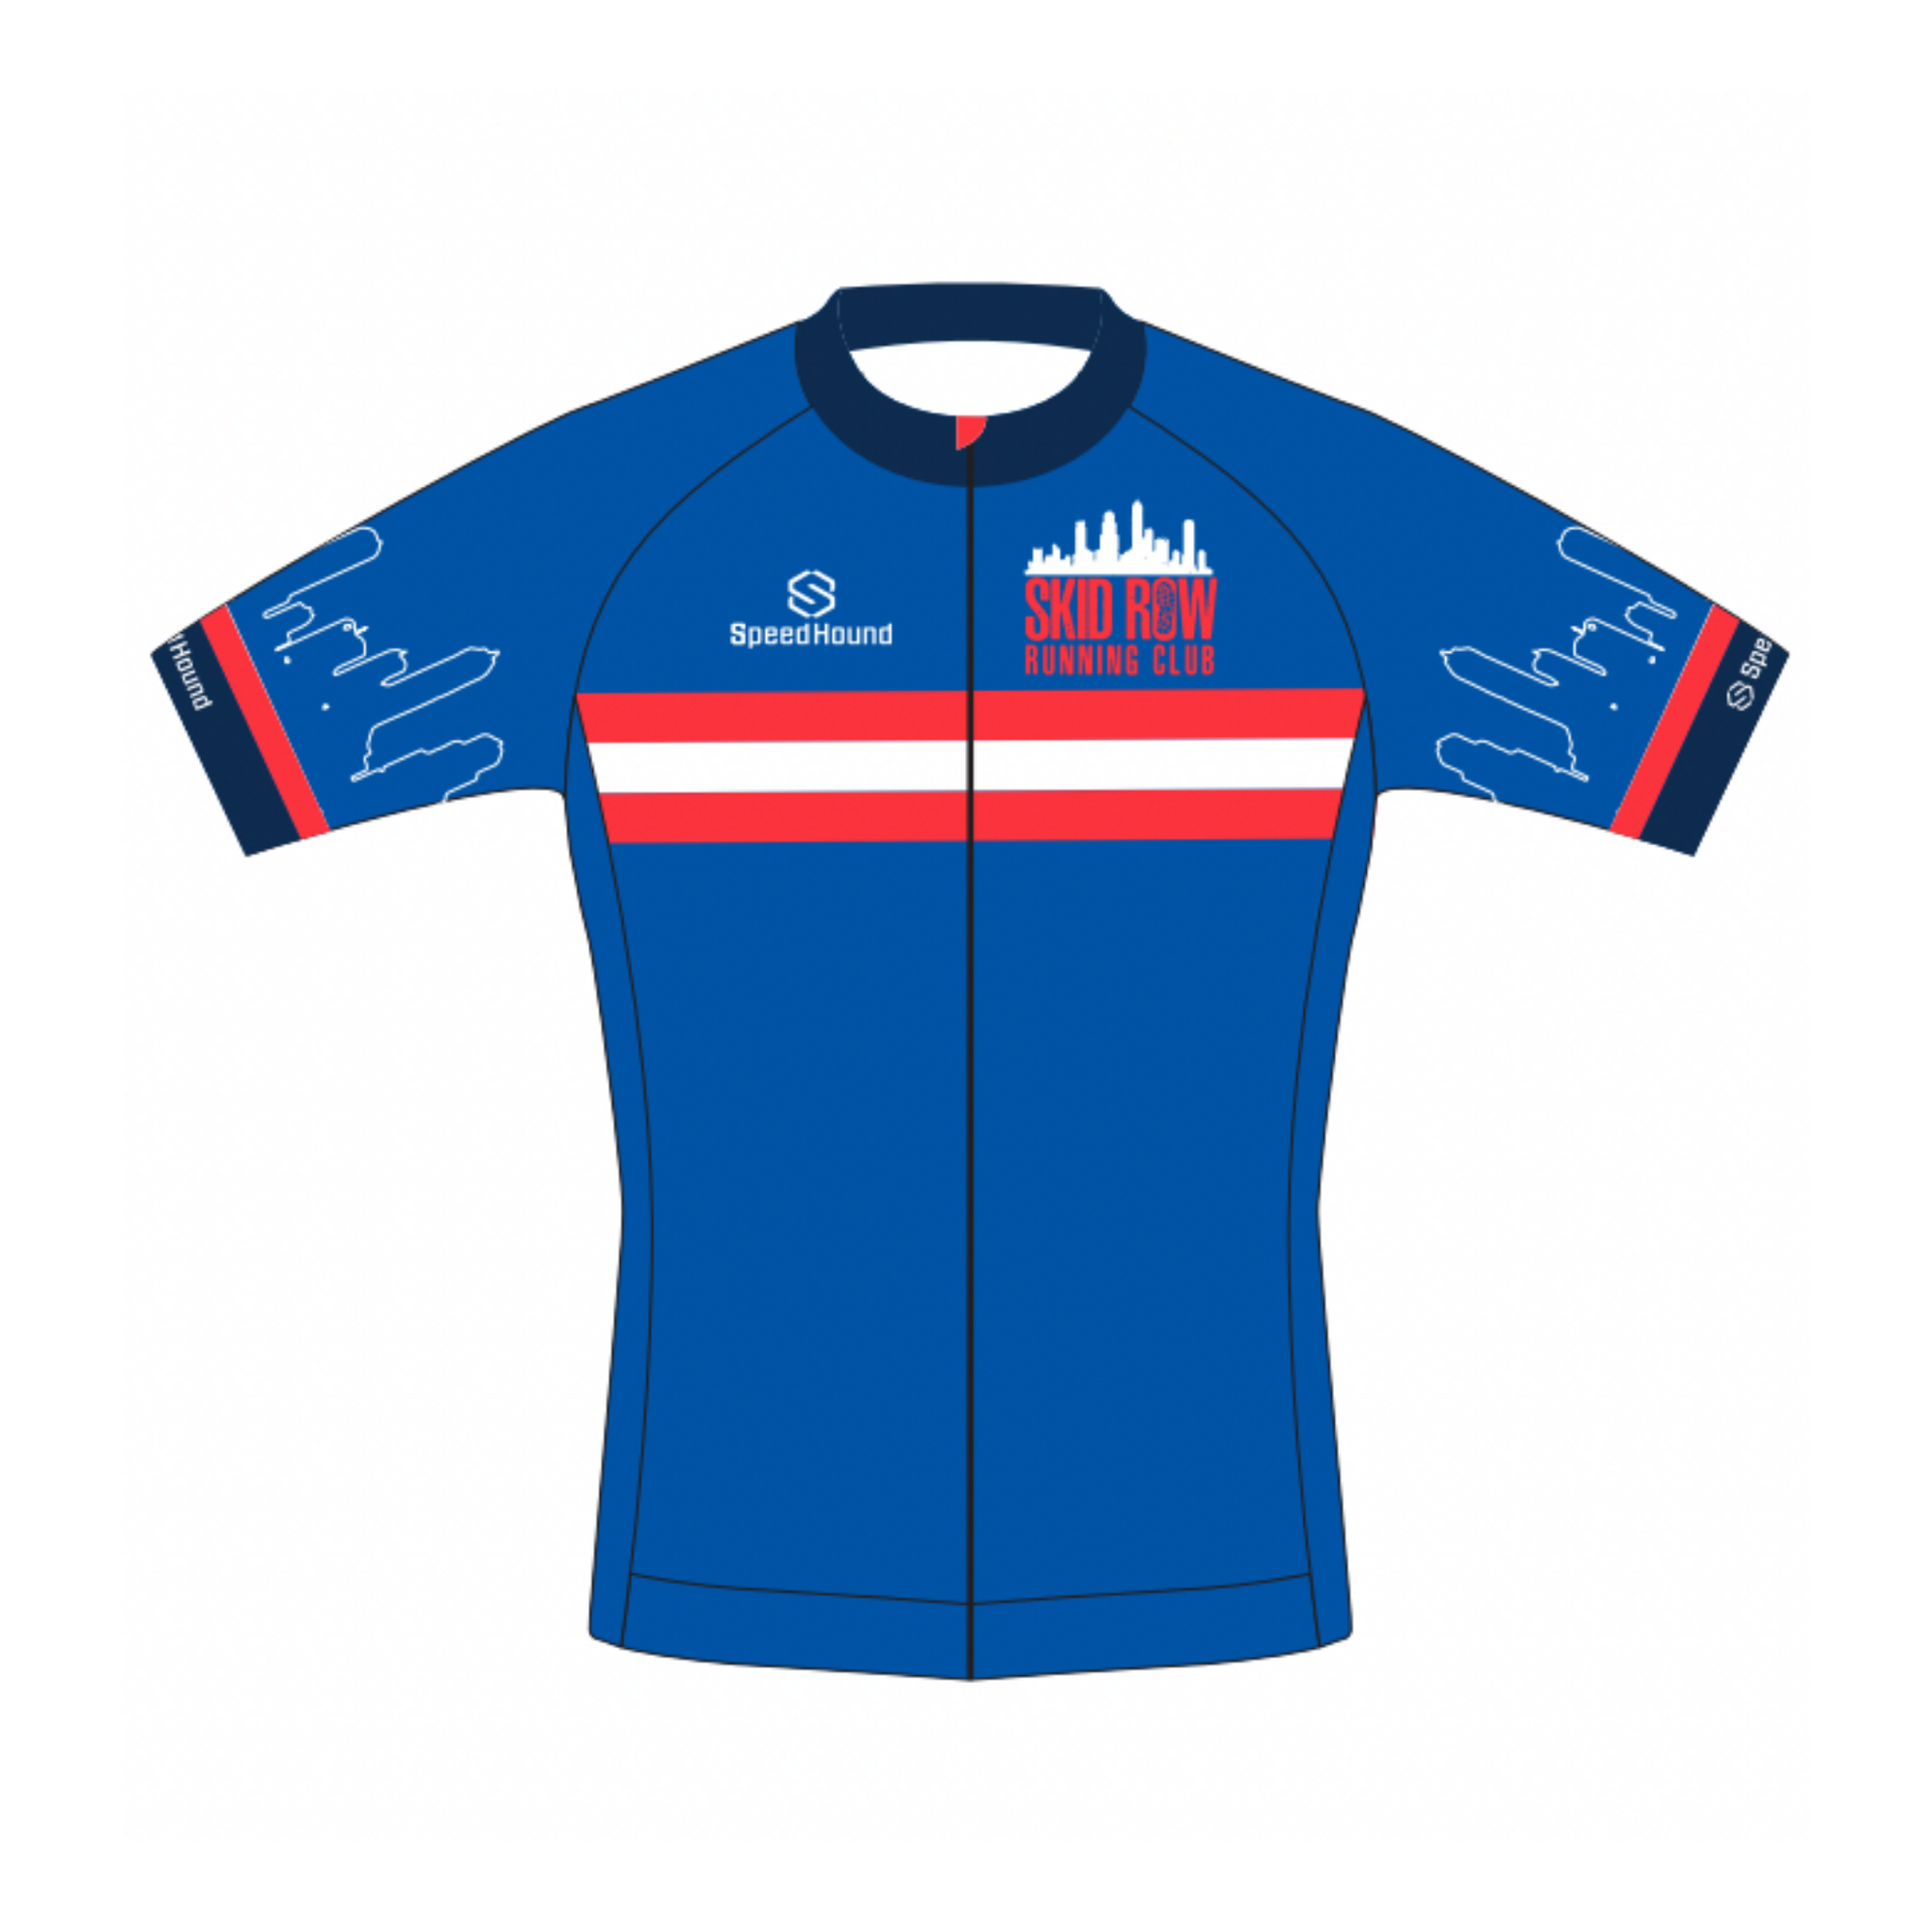 Limited Edition Skid Row Men's Cycling Jersey - The Speed Hound